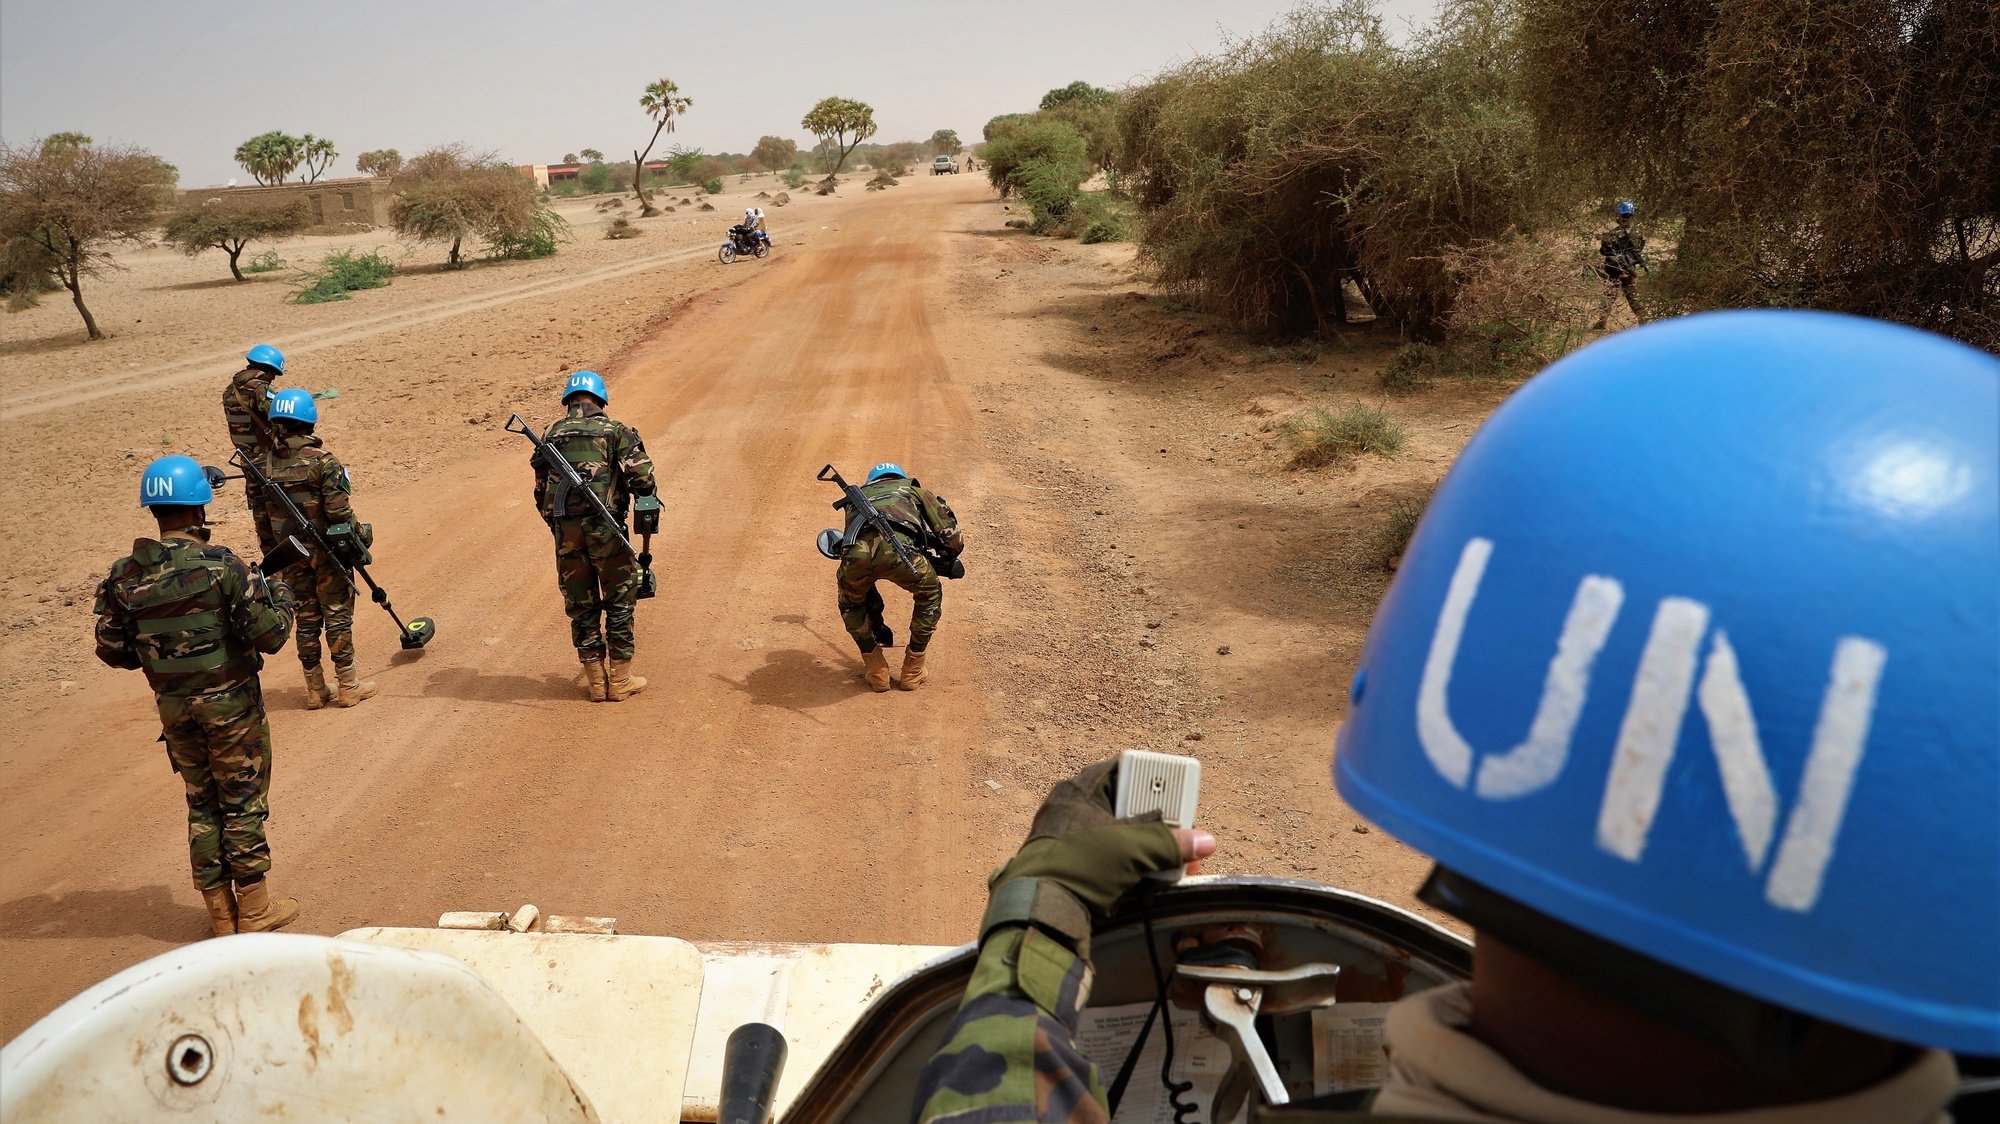 epa07519666 A handout photo made available by MINUSMA, a United Nations peacekeeping force in Mali, showing a UN peacekeeping convoy with armoured vehicles on patrol at a undisclosed location in Mali, 27 March 2019. Reports on 21 April 2019 state one UN peacekeeper was killed and four others wounded in an attack 20 April against MINUSMA forces in Mali&#039;s Mopti region. MINUSMA said in a statement that a UN convoy was attacked by using an improvised explosive device, also called IED. UN confirmed those dead and injured were from Egypt. One attacker was reportedly killed while eight others were taken prisoners.  EPA/MINUSMA HANDOUT  HANDOUT EDITORIAL USE ONLY/NO SALES